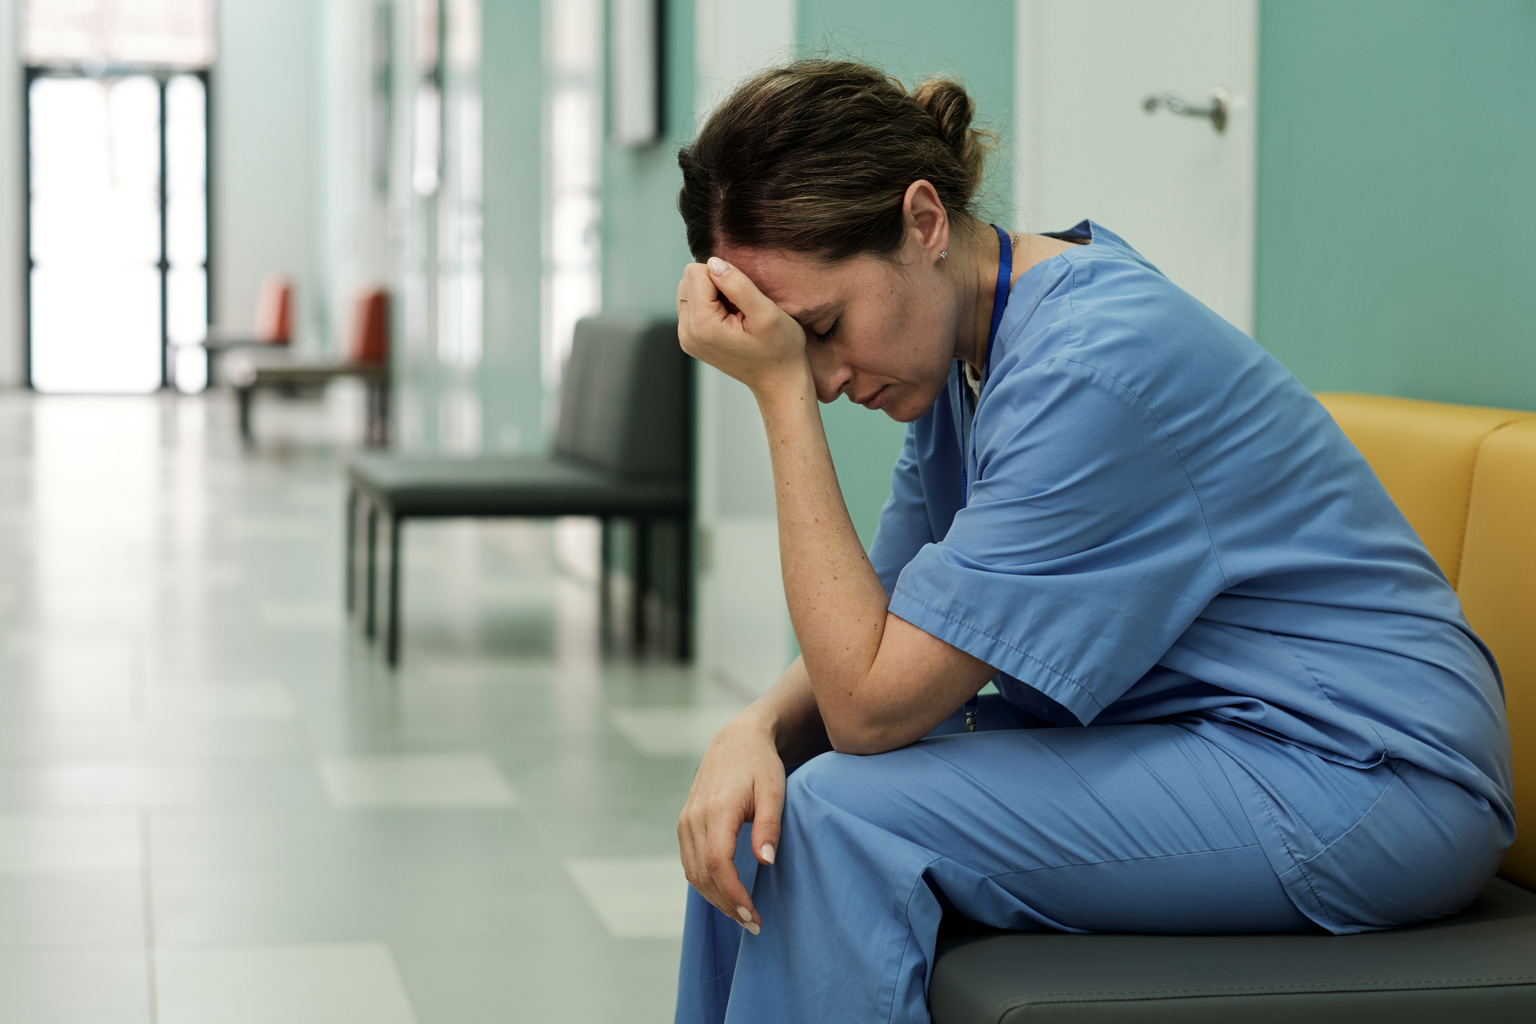 Why hospitals should offer programs to reduce nurse burnout 